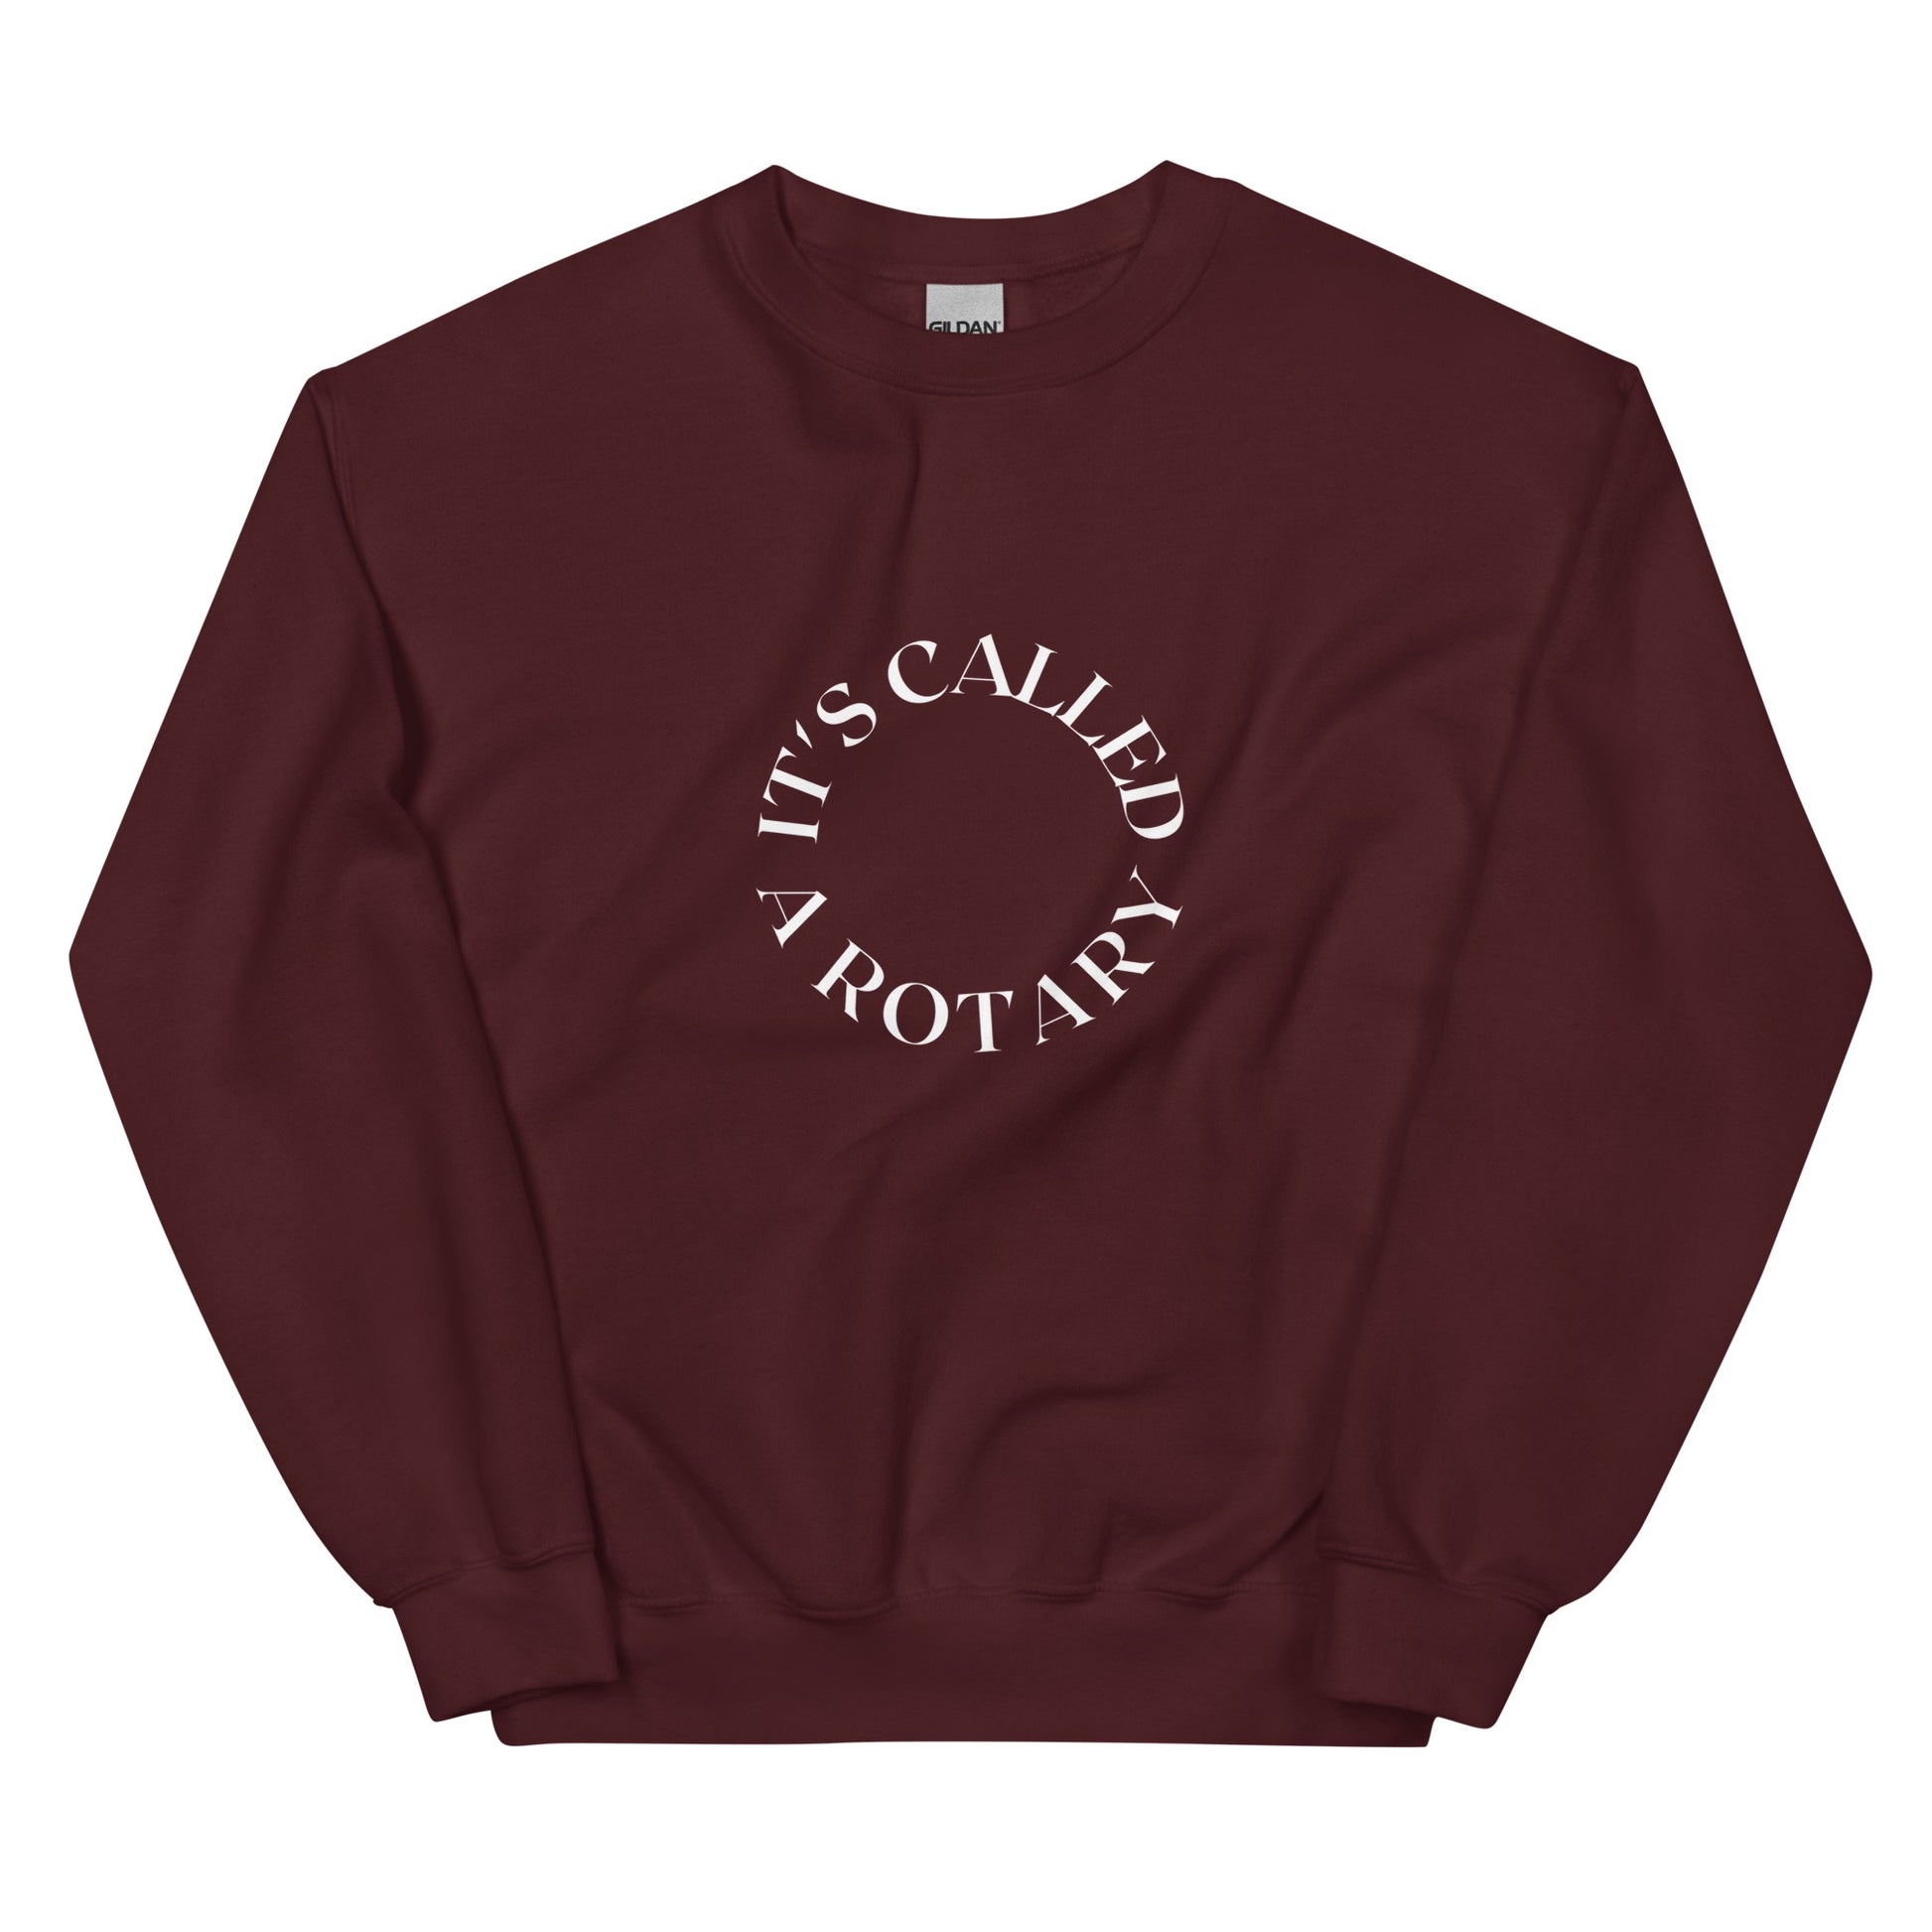 maroon crewneck that says "it's called a rotary" in white lettering shaped in a circle